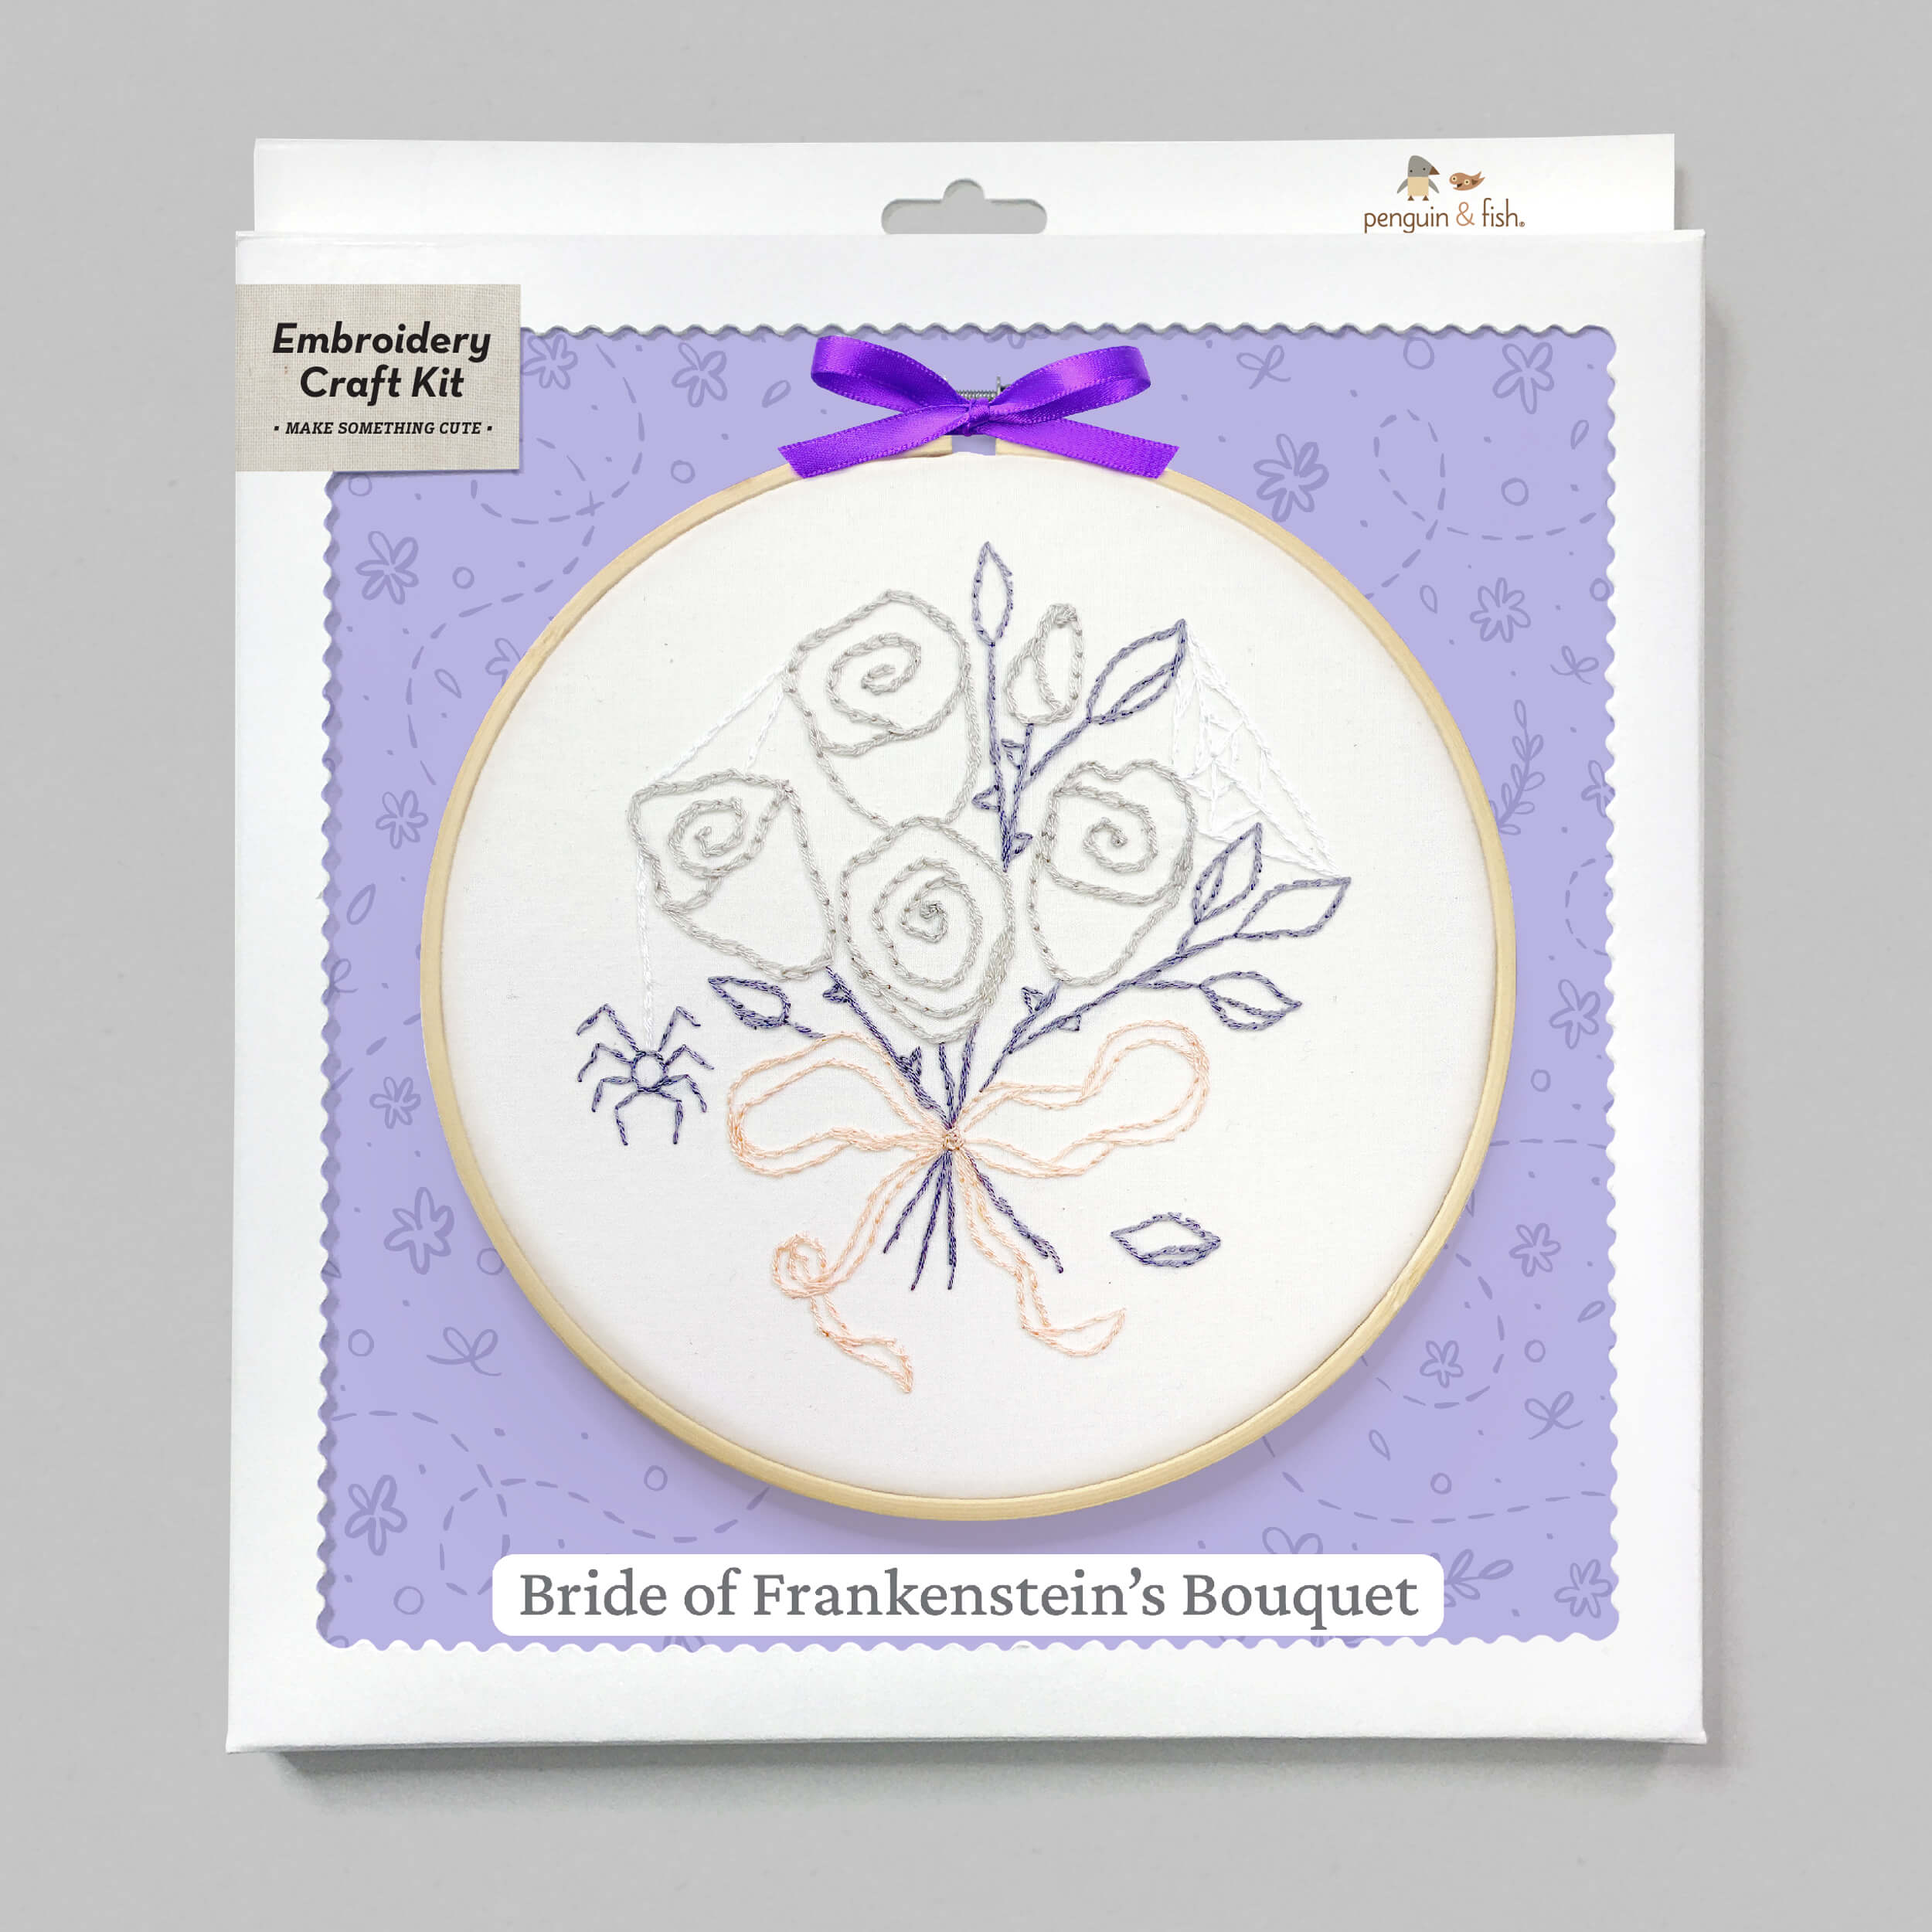 Bride of Frankenstein's Bouquet Halloween embroidery kit in a box